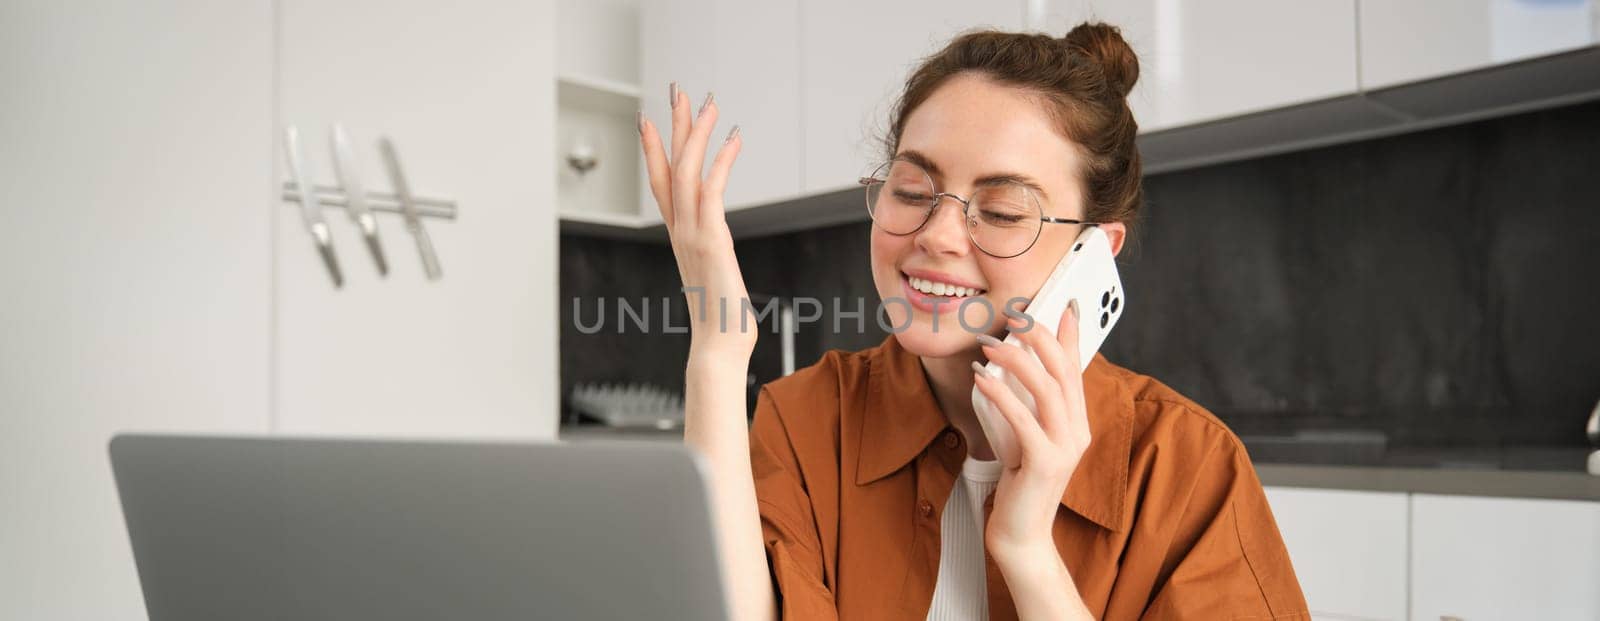 Portrait of young businesswoman, self-employed lady working from home, making phone calls to clients and smiling, using laptop in kitchen.